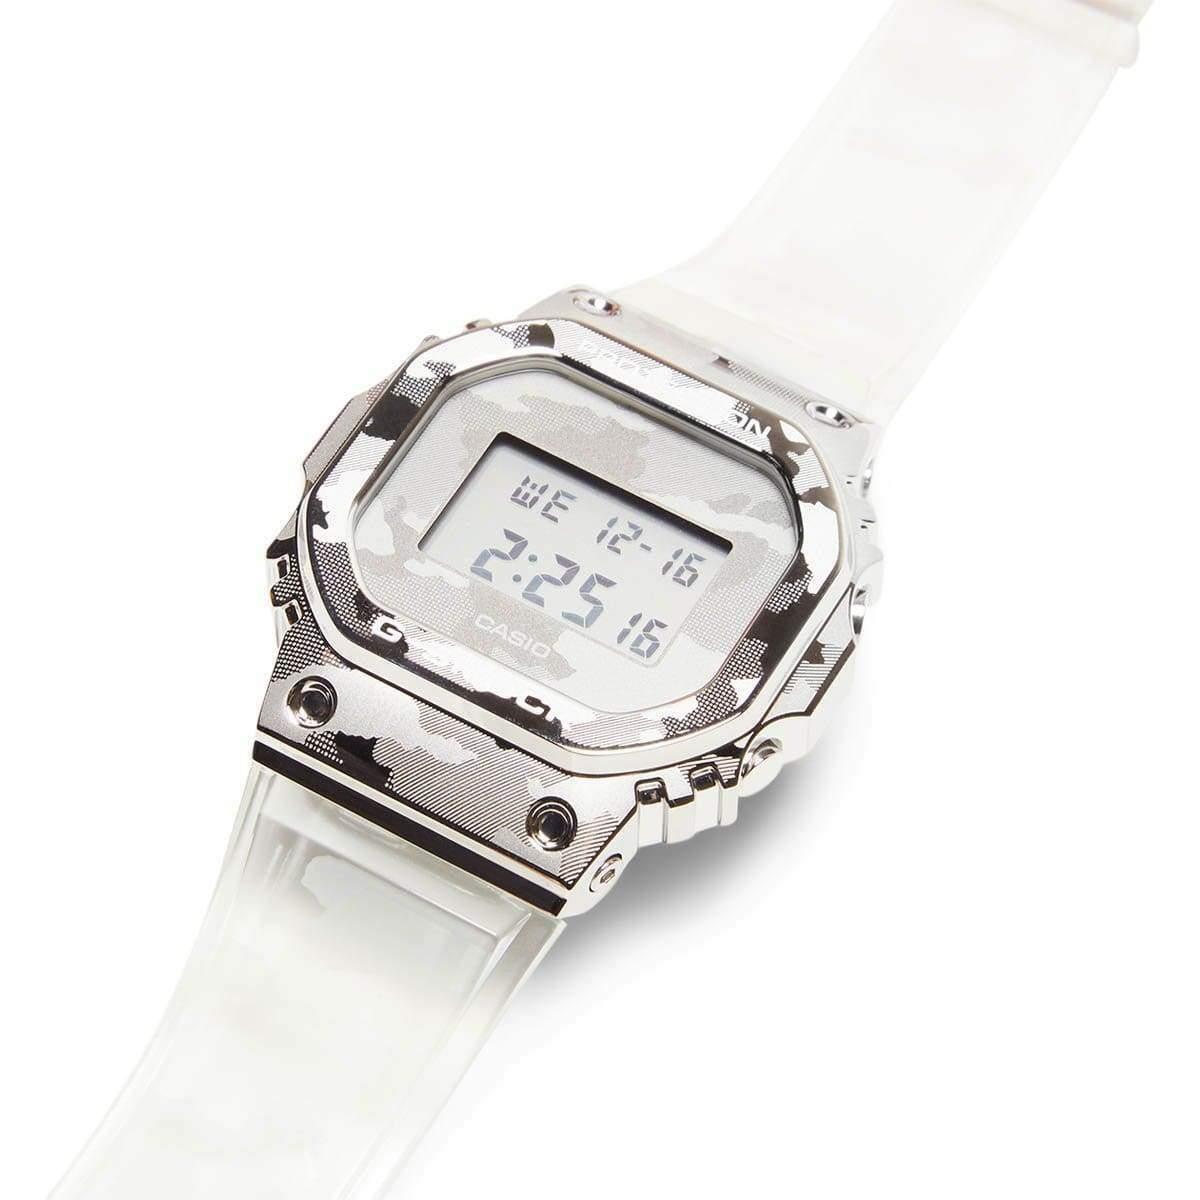 Casio watch [GM5600]  - Silver , CAMO Dial, Camouflage Band 3